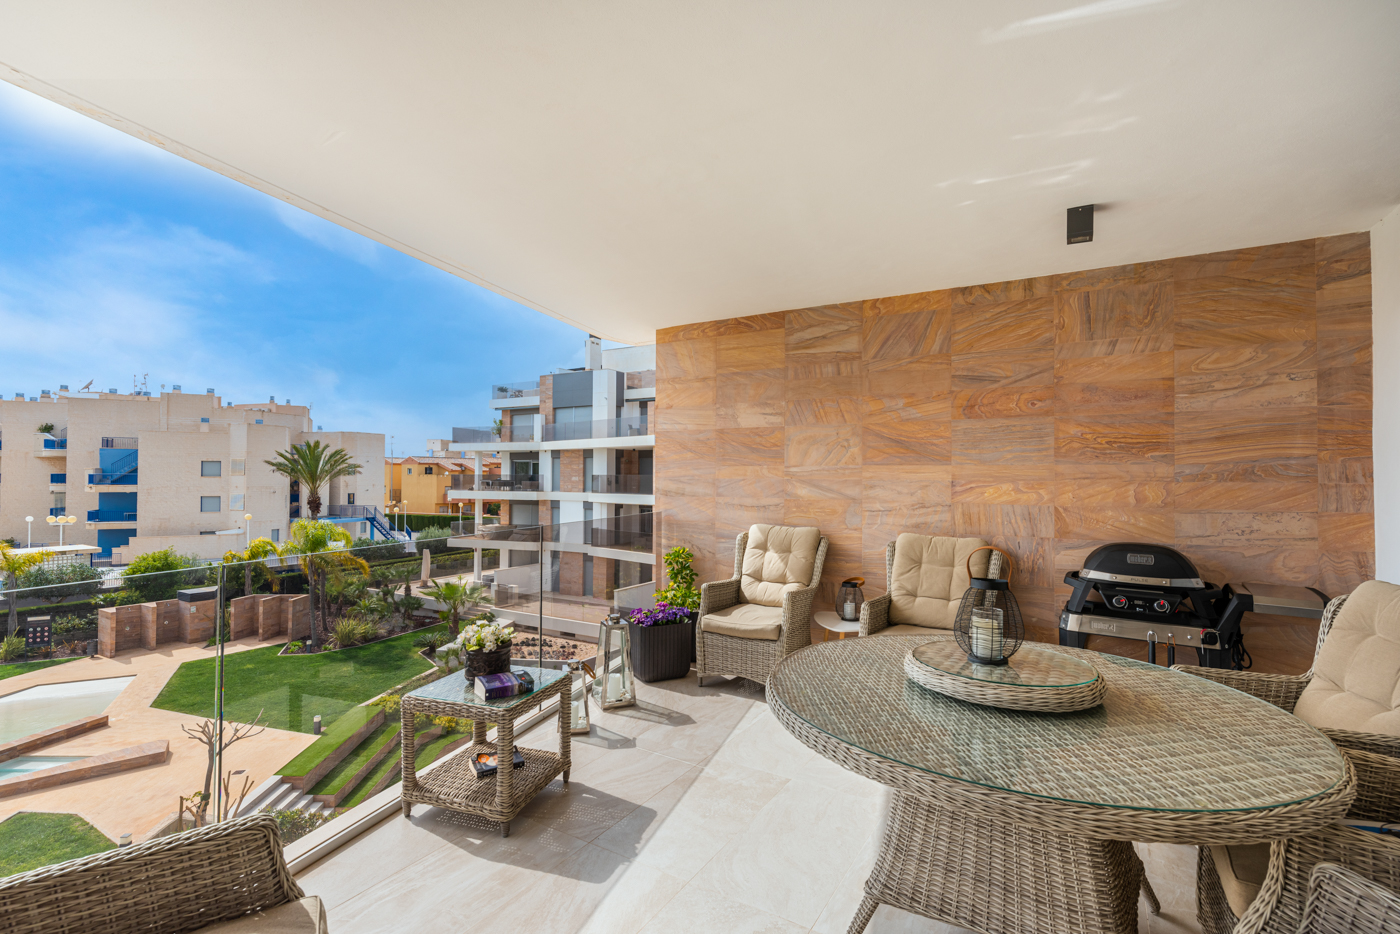 For sale: 3 bedroom apartment / flat in Cabo Roig, Costa Blanca